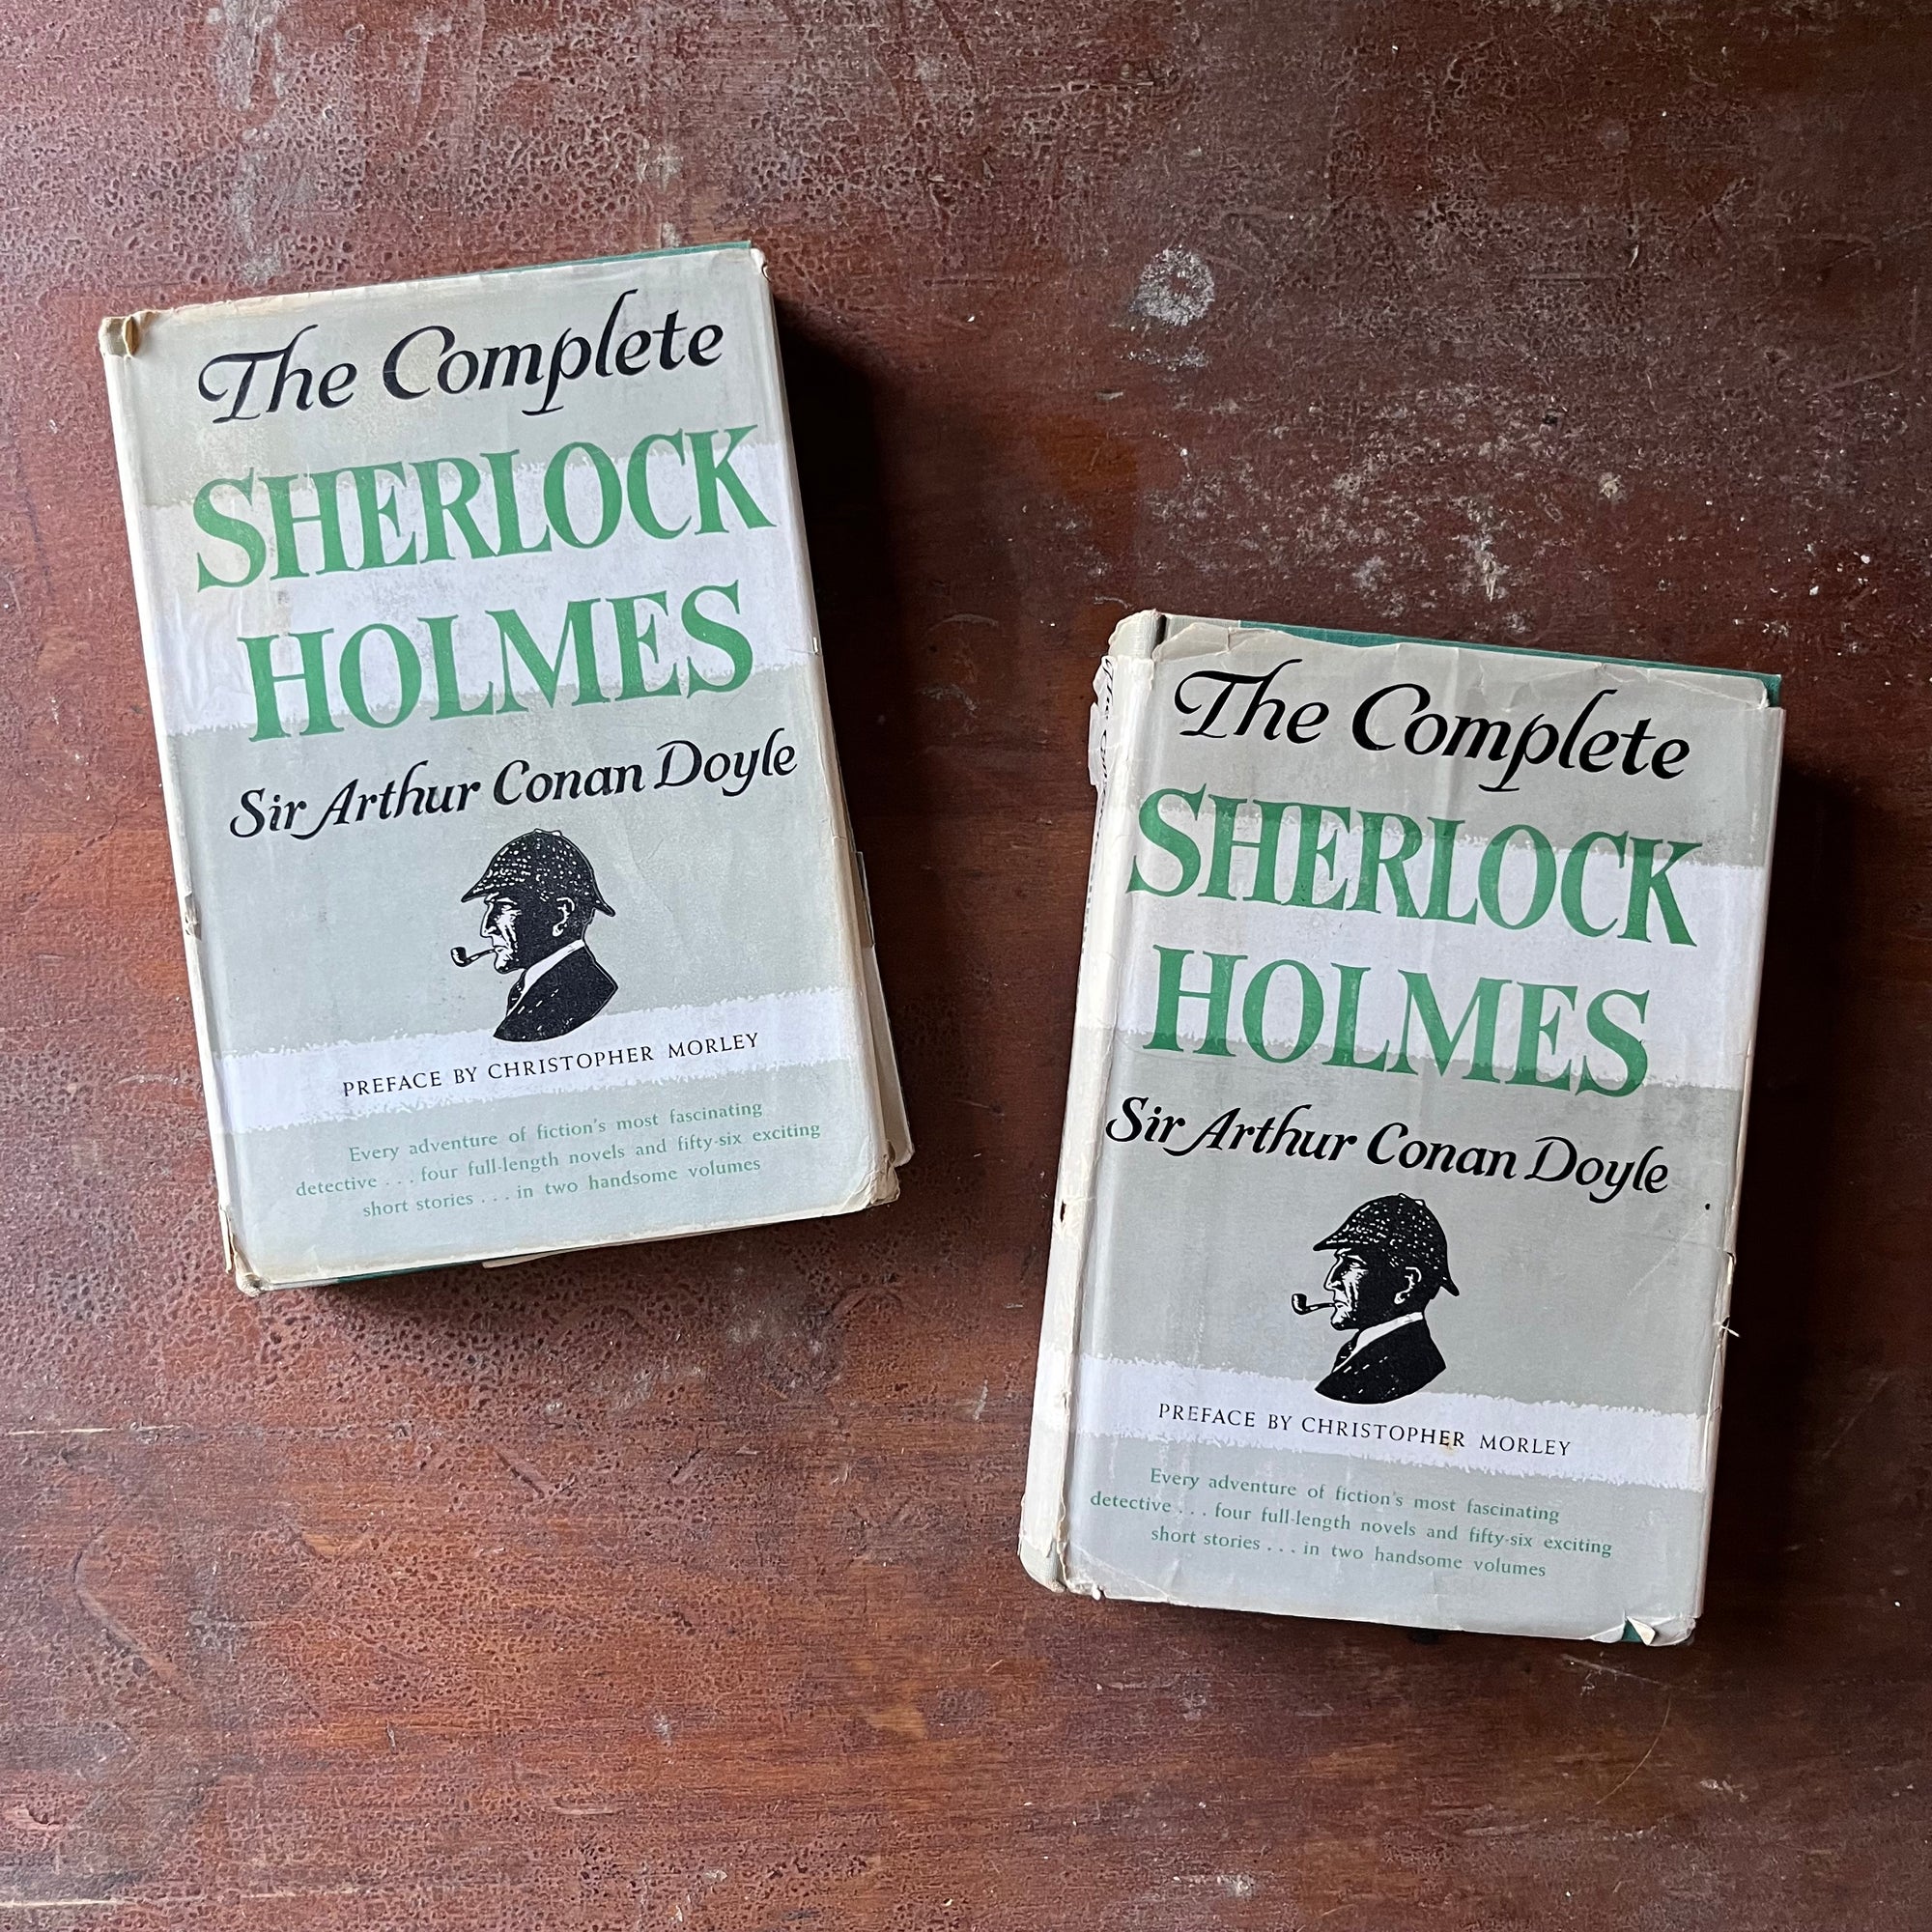 vintage mysteries - The Complete Sherlock Holmes Two Volume Book Set written by Sir Arthur Conan Doyle - view of the dust jacket's front cover with the iconic Sherlock Holmes profile of him in a hat smoking a pipe